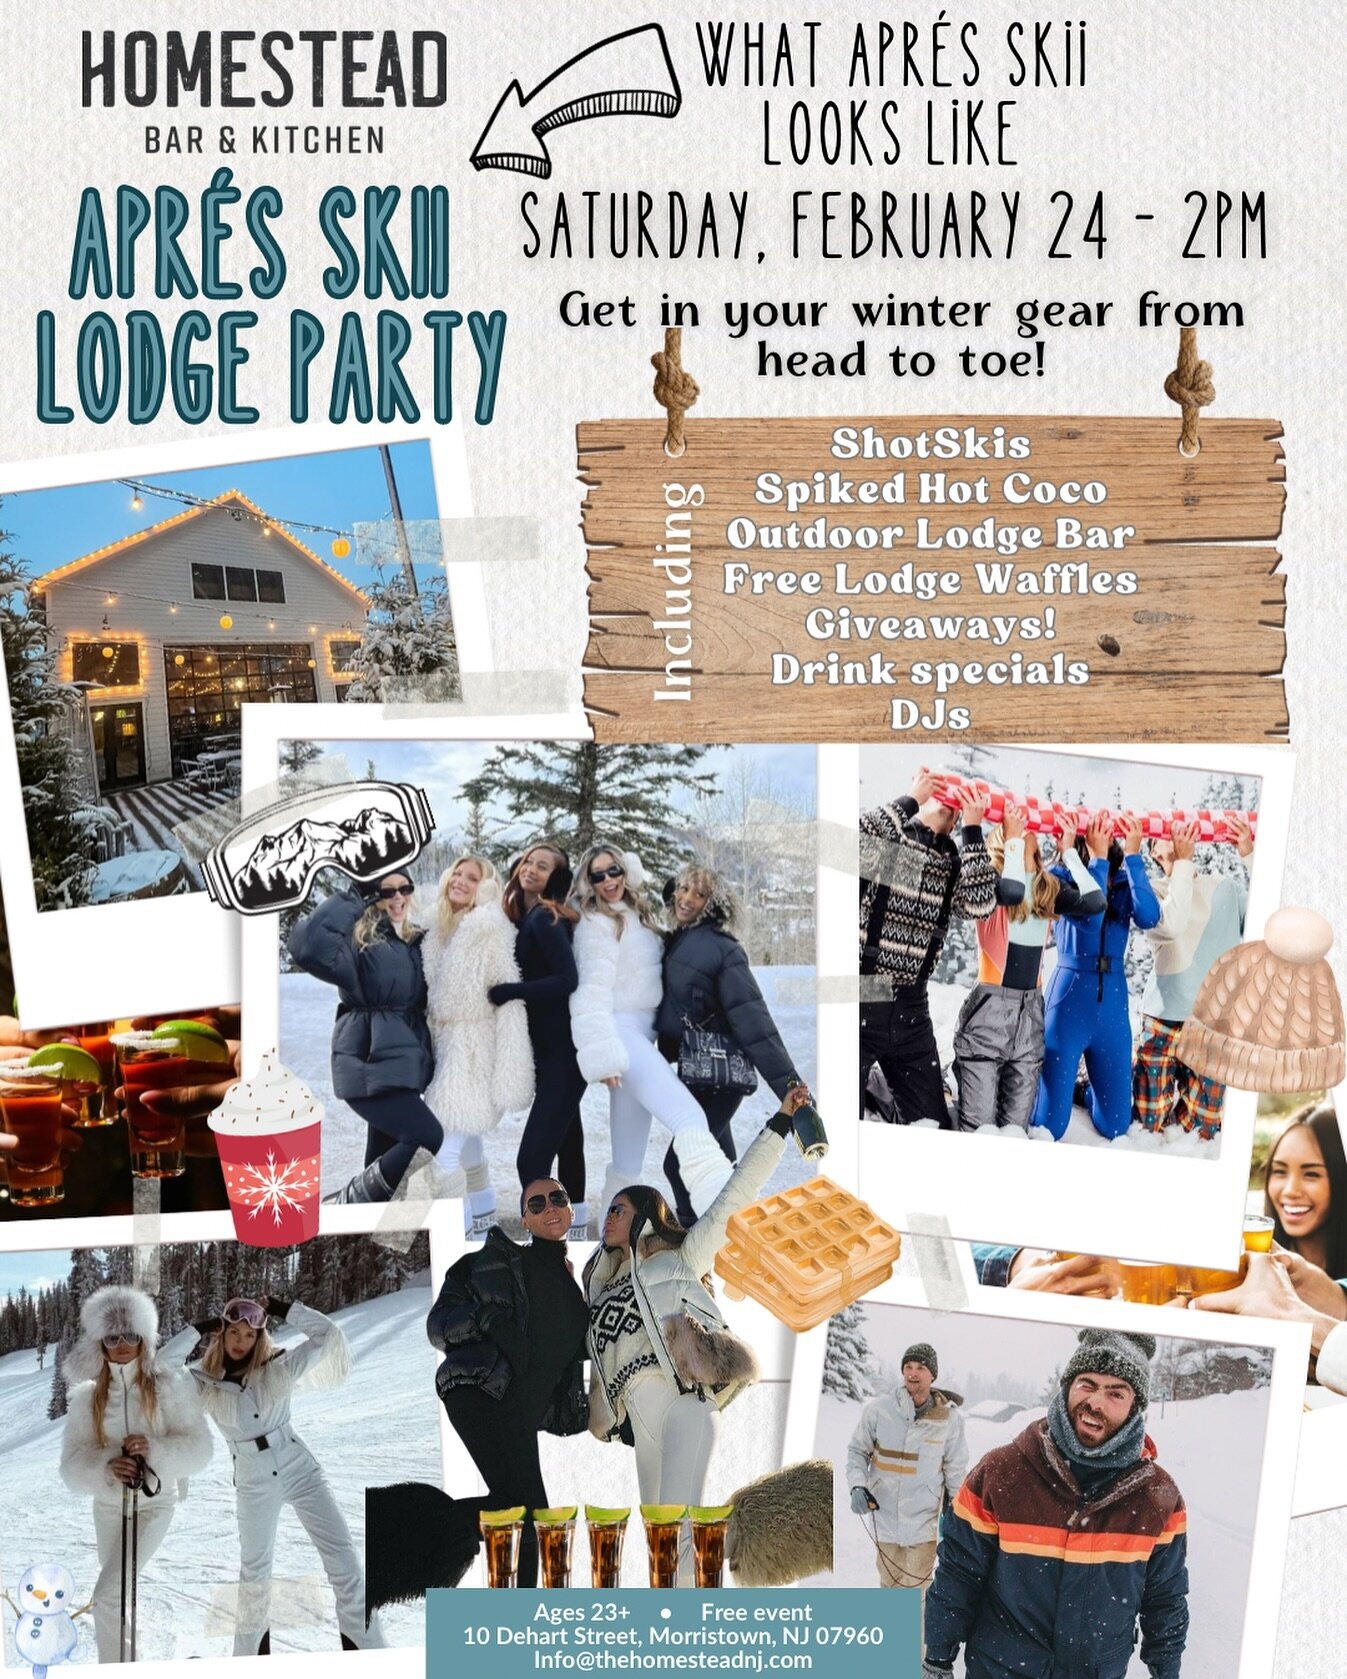 FEB 24th! It&rsquo;s Apr&egrave;s Skii szn ⛷️❄️ Get your winter gear together, show up in your puffer coats, beanies, uggs and more and enjoy our end-of-winter Skii lodge party! With ShotSkiis, giveaways, free mini waffles, hot coco (or spiked) our o